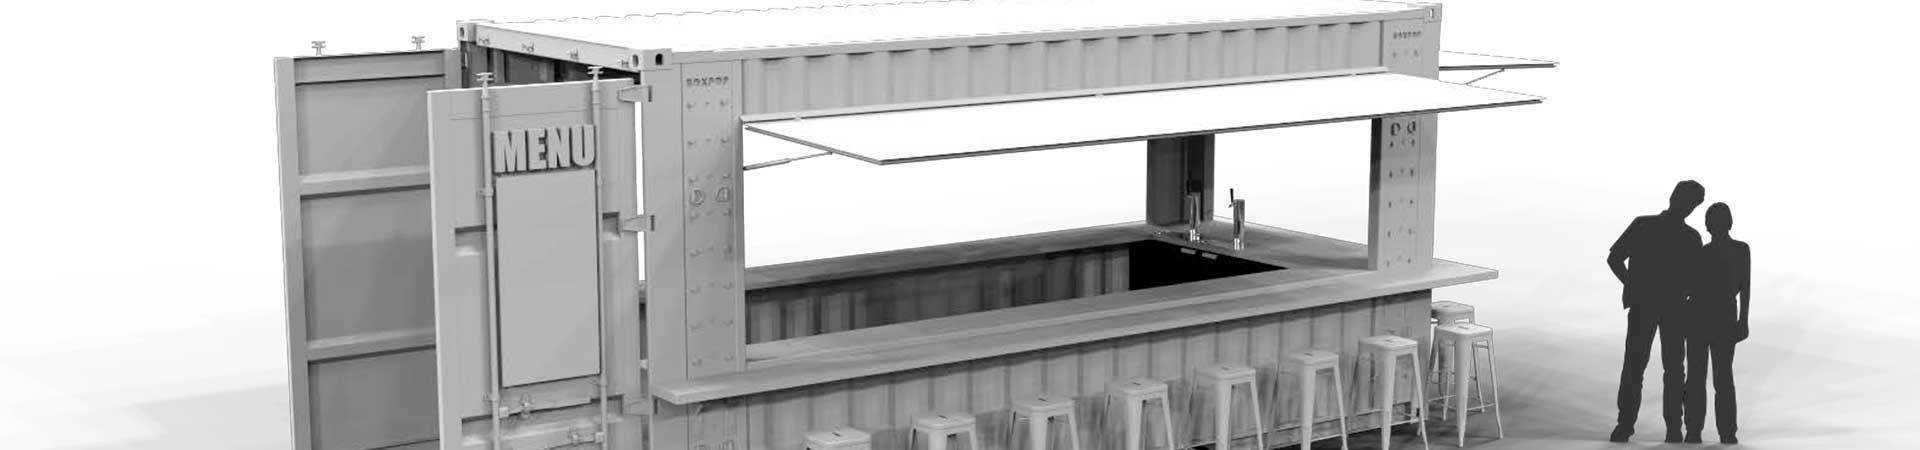 Custom box pop shipping container rendering of a basic shipping container bar.